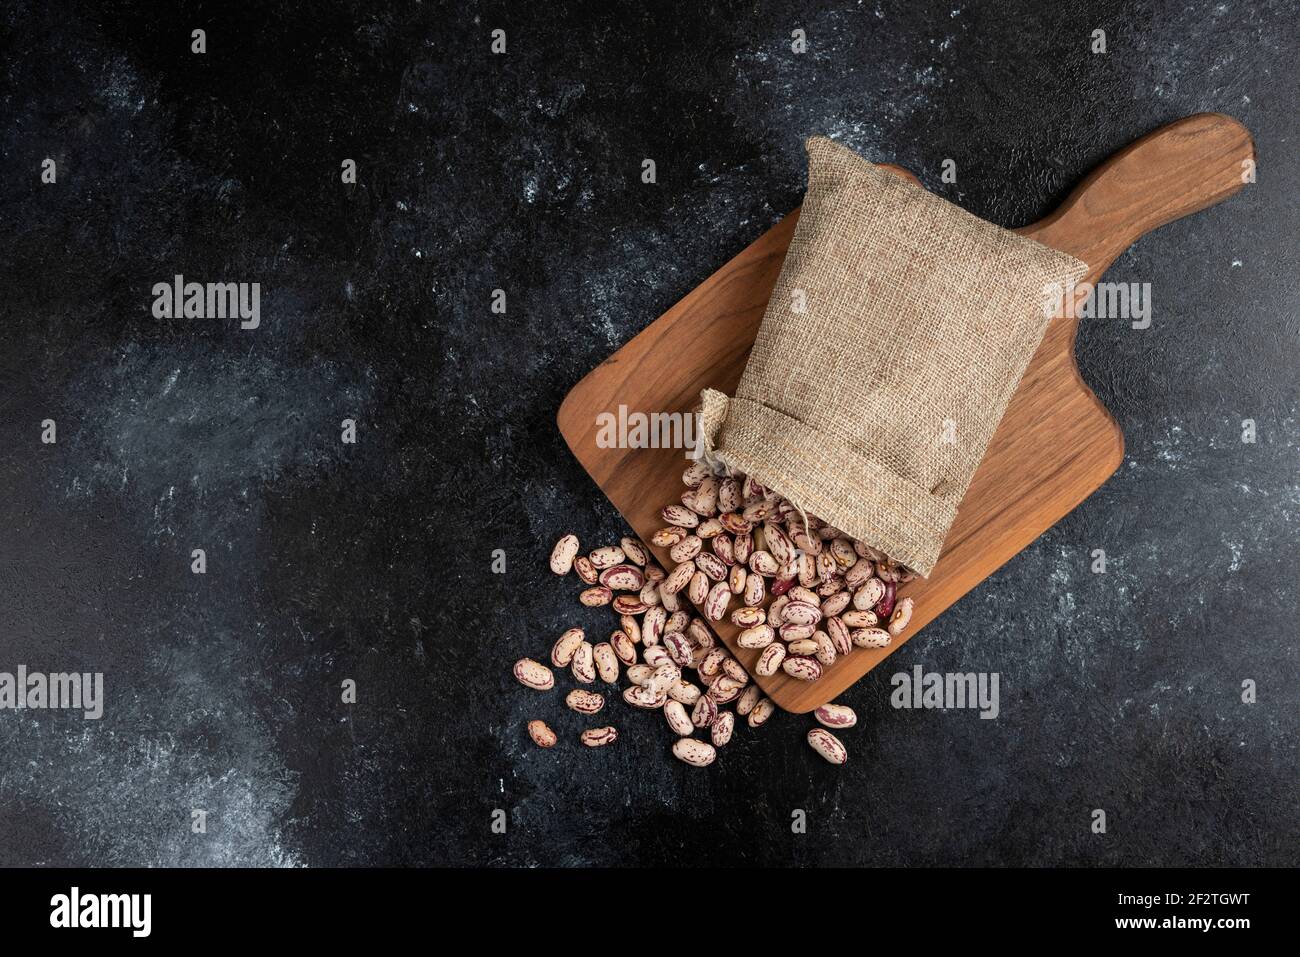 Sackcloth of dried raw beans placed on wooden board Stock Photo